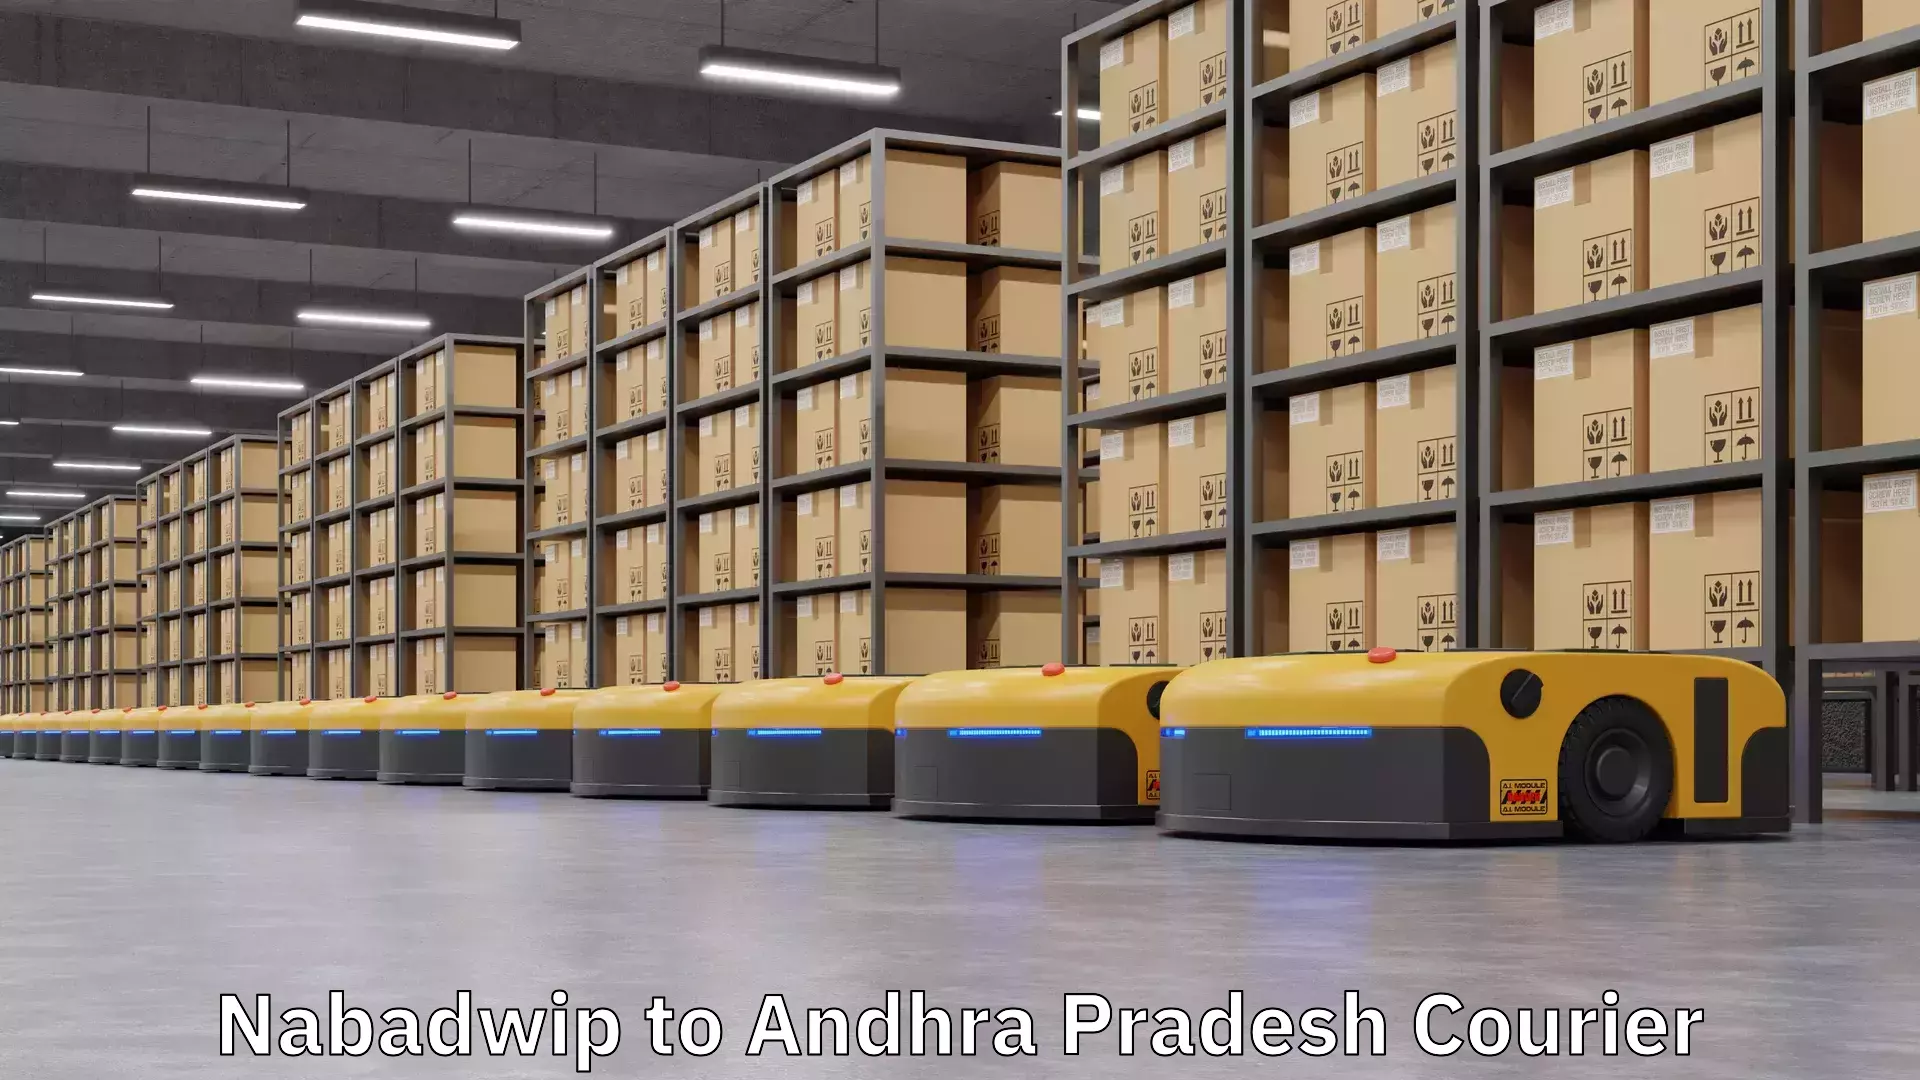 Quality courier partnerships in Nabadwip to Visakhapatnam Port